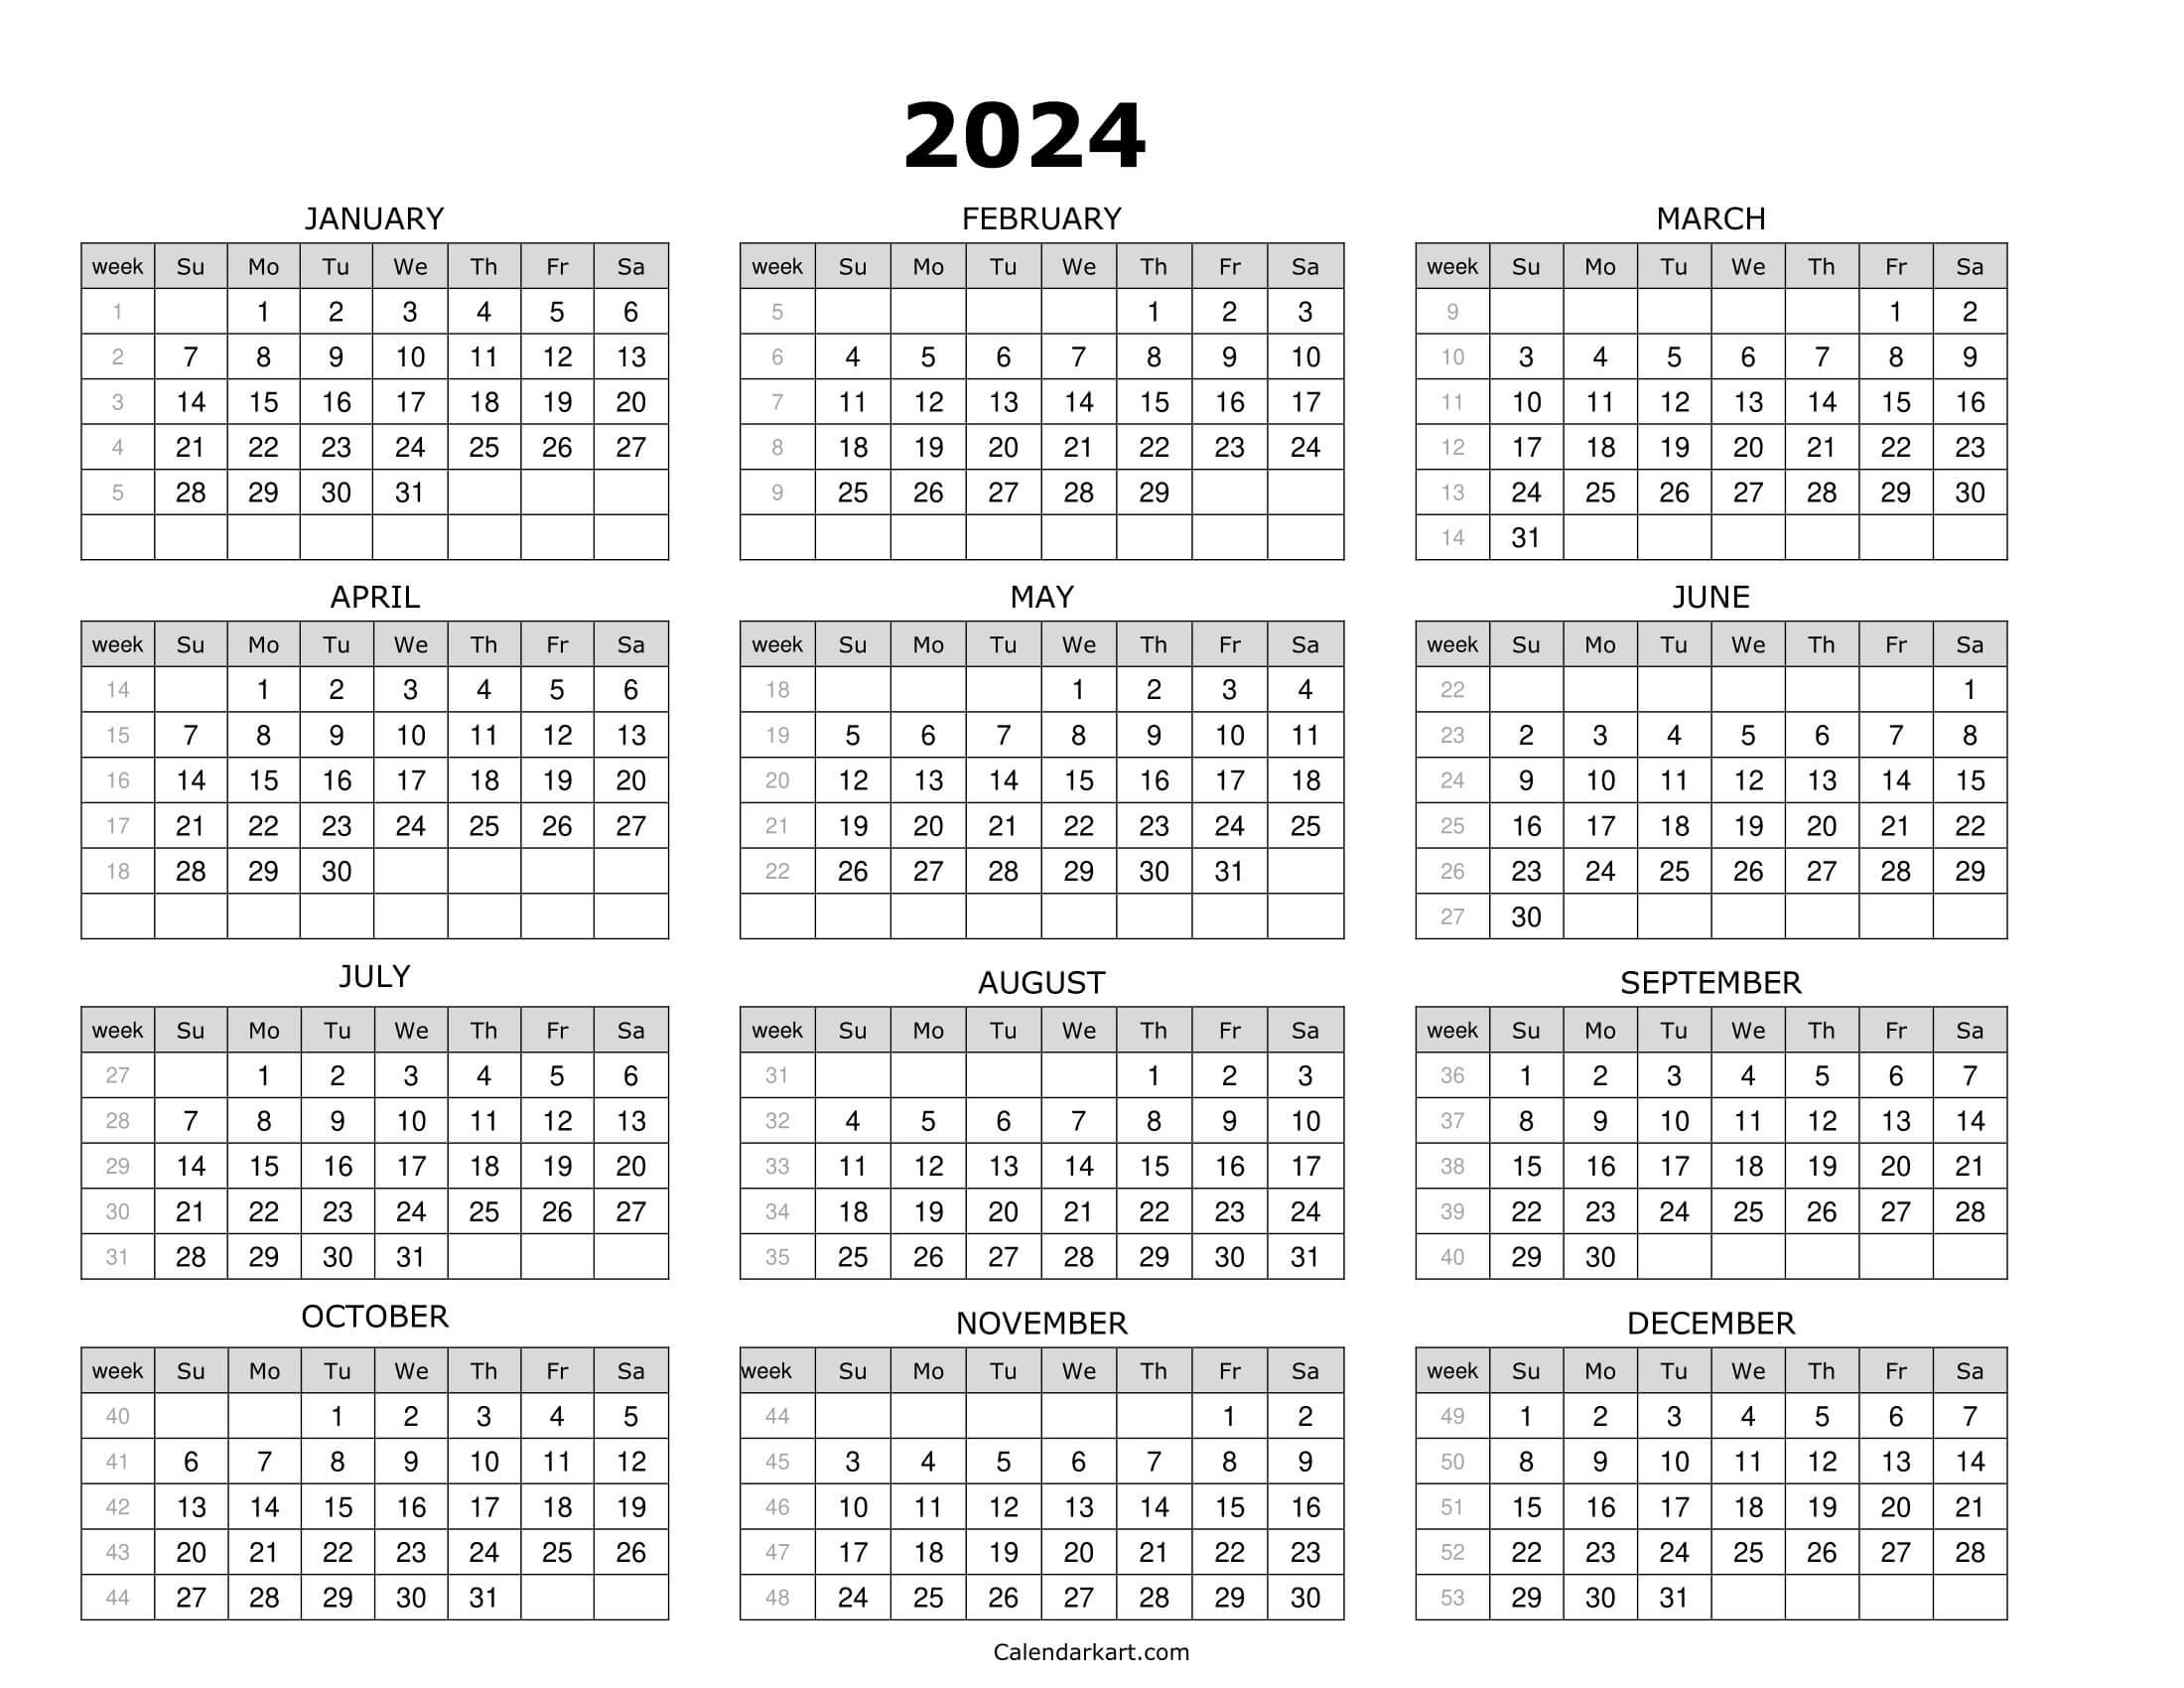 Download Printable Year At Glance Calendar 2024 | Calendarkart regarding Free Printable Calendar 2024 Time And Date